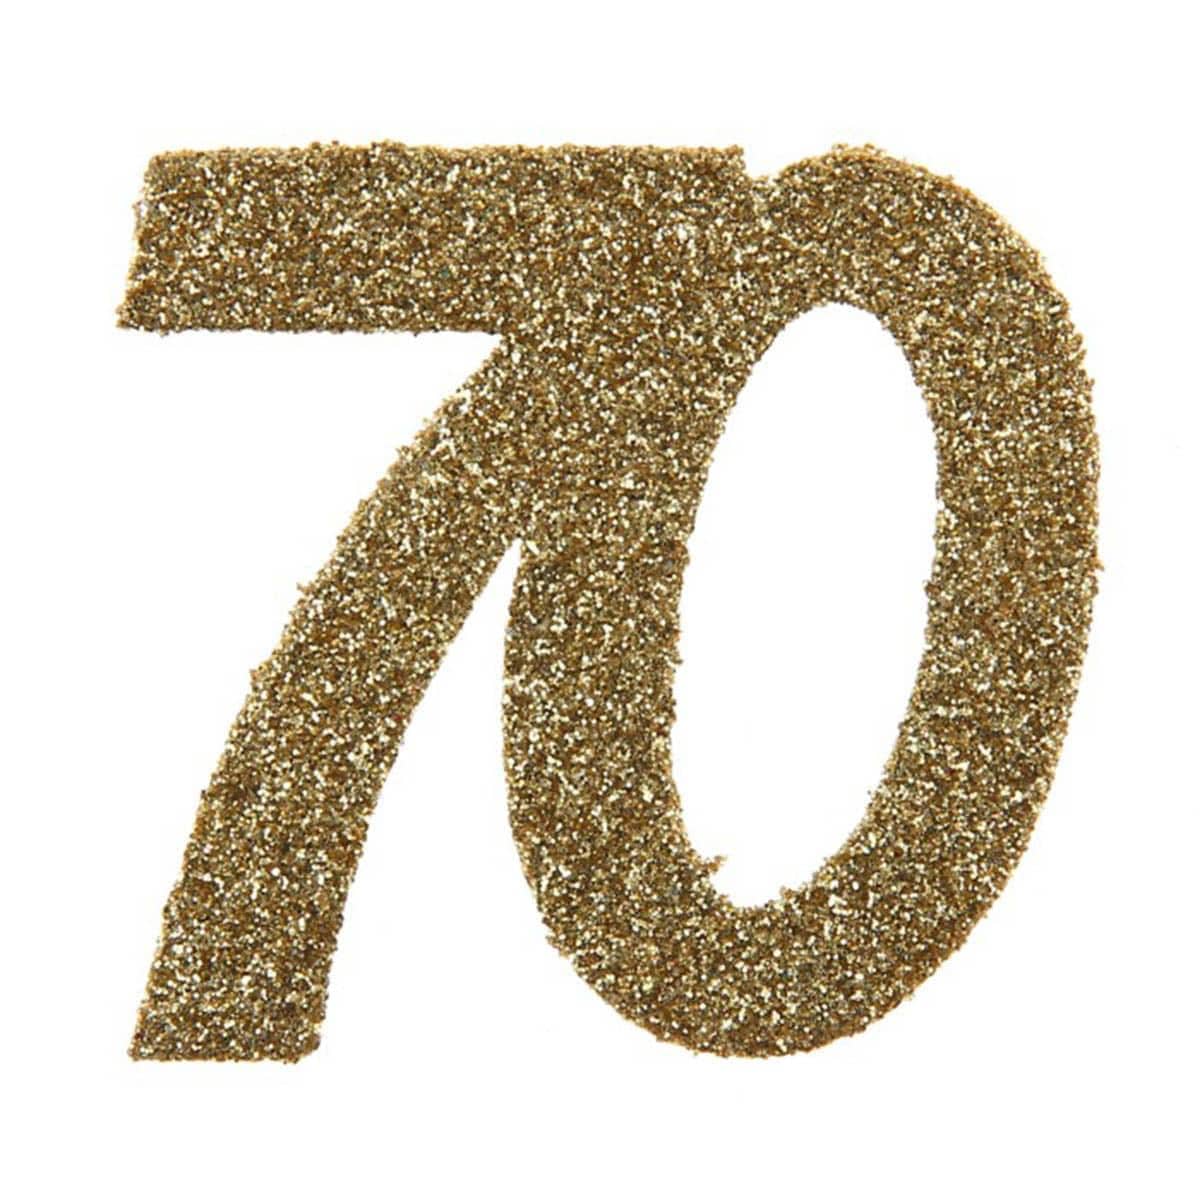 SANTEX Age Specific Birthday Glittery Number 70 Decoration, Gold, 6 Count